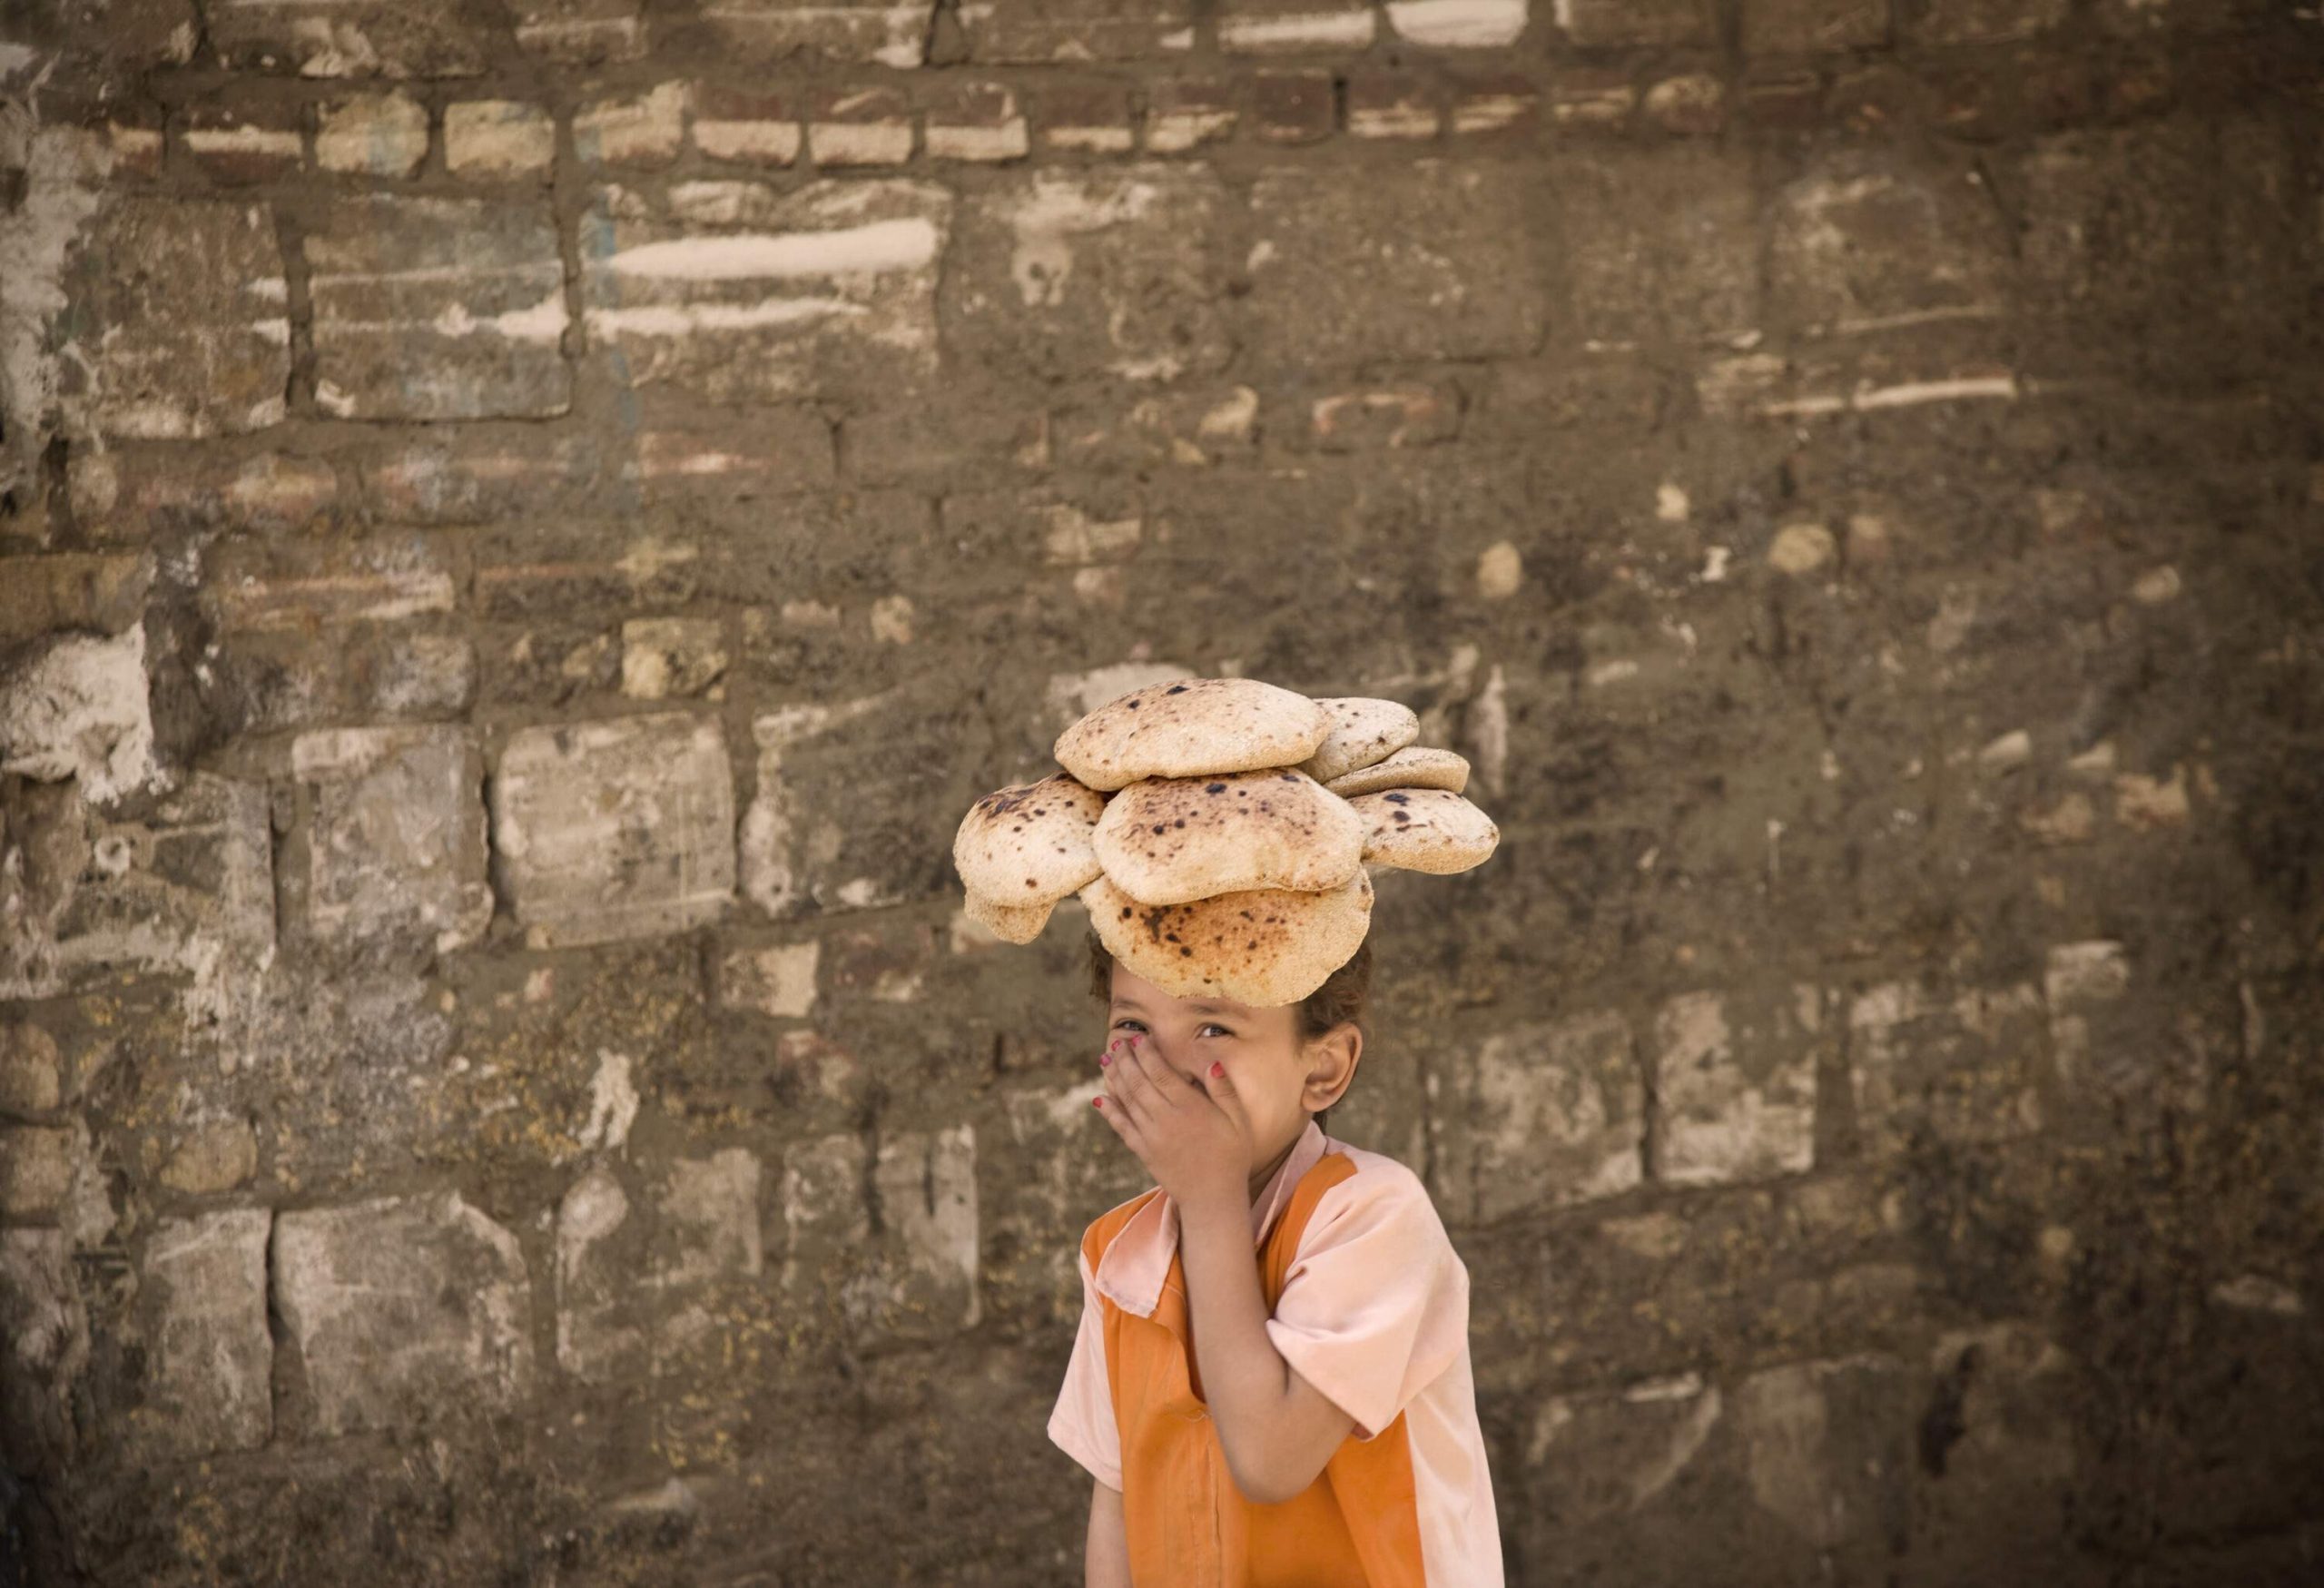 dest_egypt_cairo_kid_with_bread_on_her_head_gettyimages-83113189_universal_within-usage-period_97138